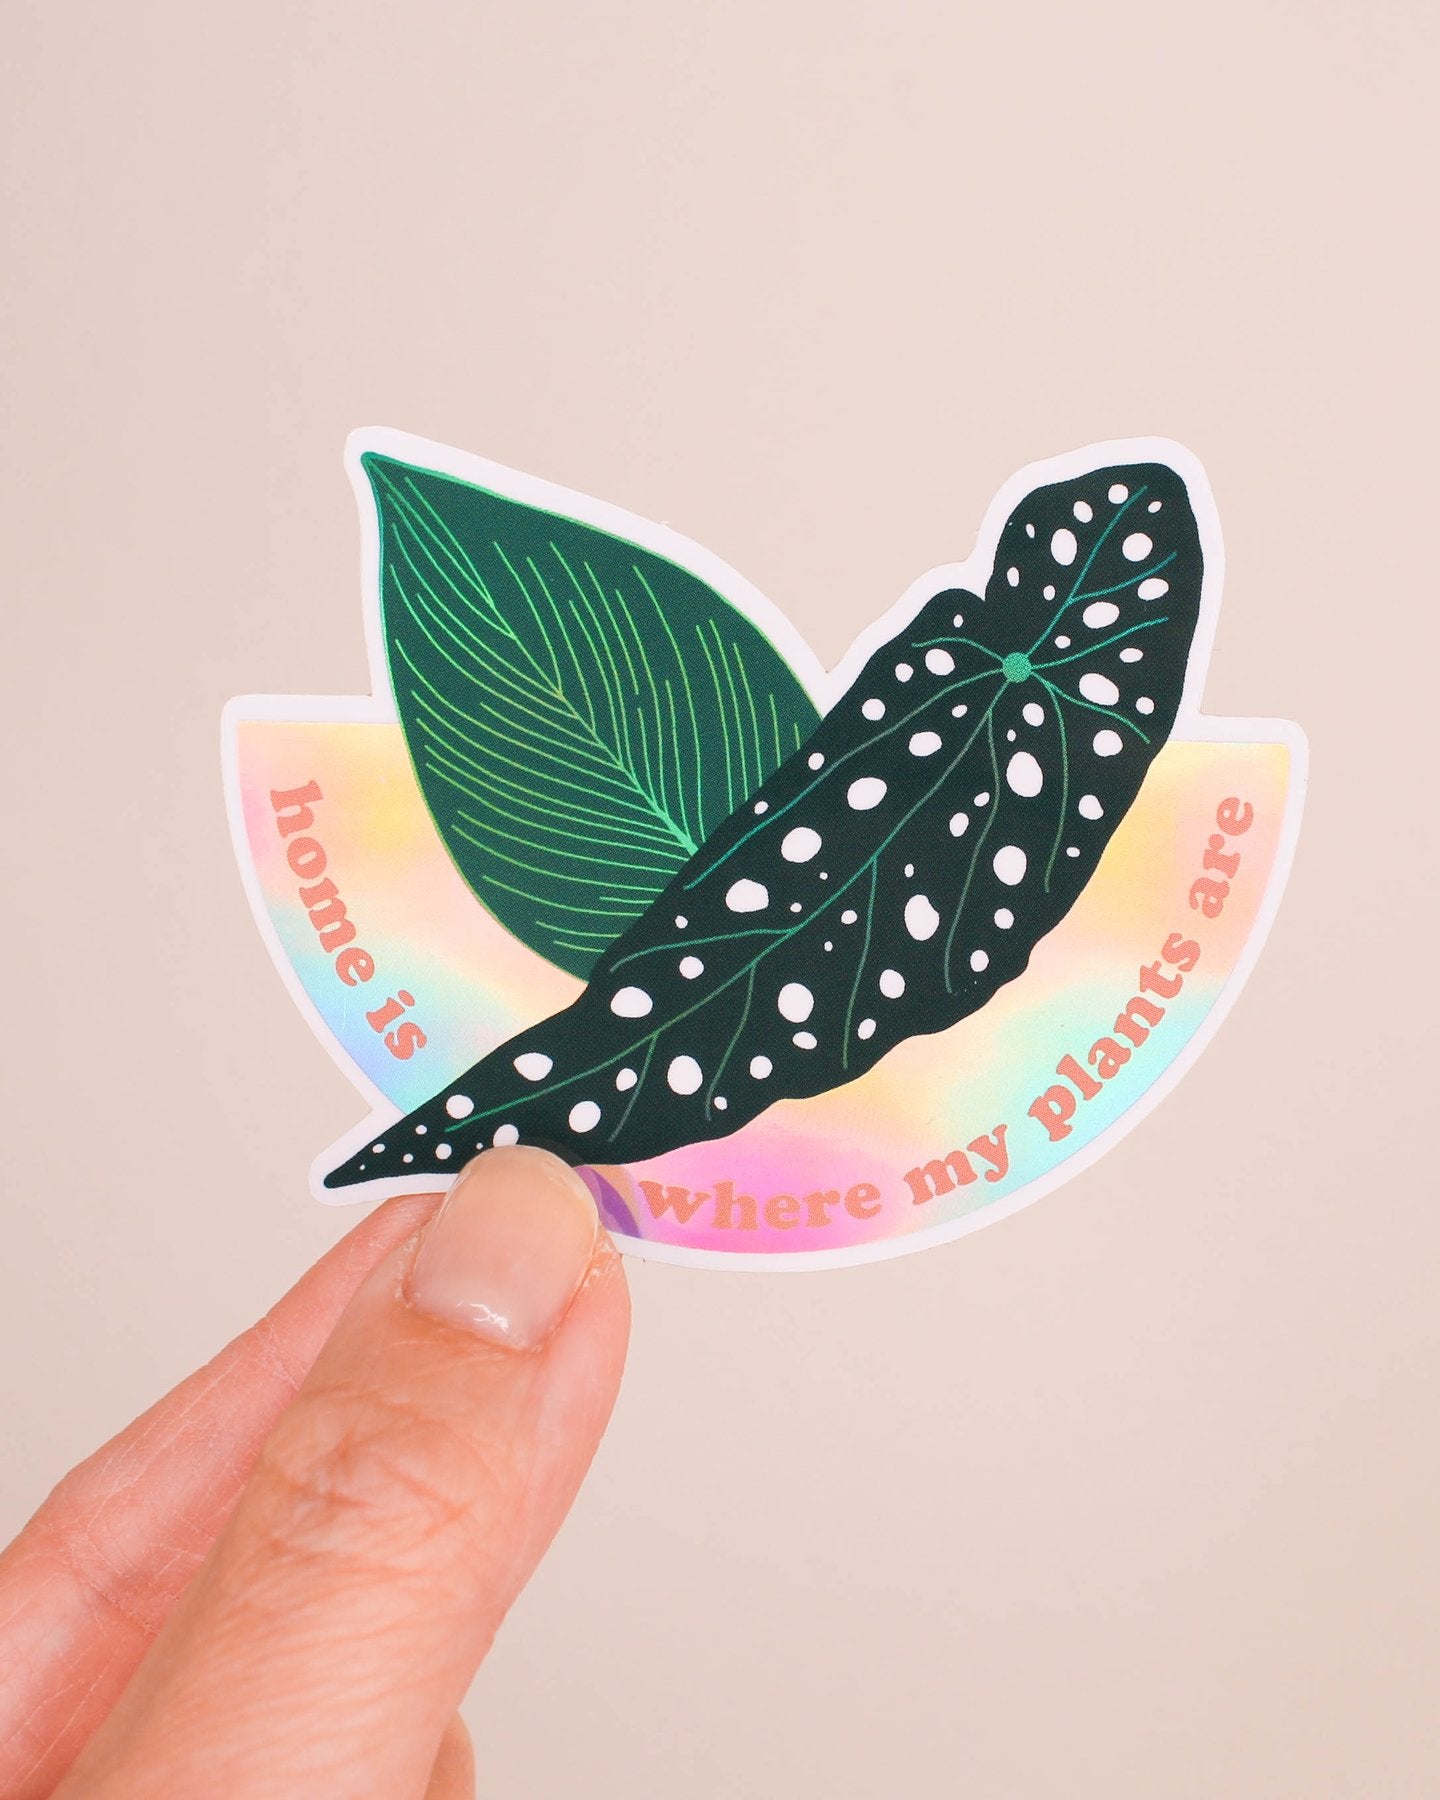 HEMLEVA Holographic Sticker - Home is Where My Plants Are